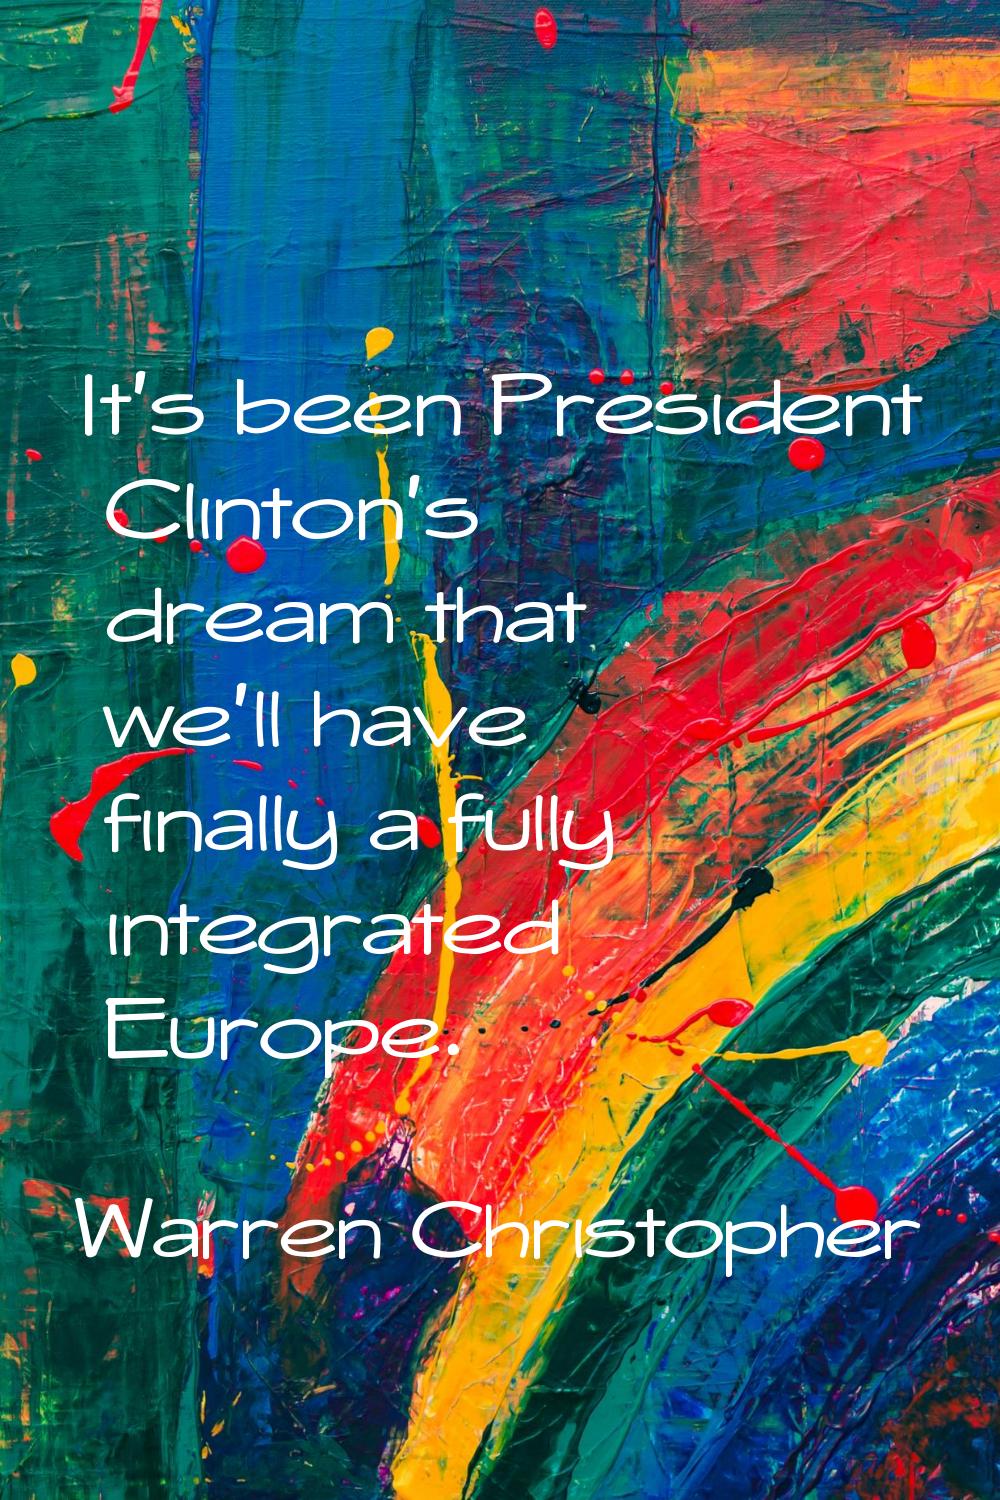 It's been President Clinton's dream that we'll have finally a fully integrated Europe.